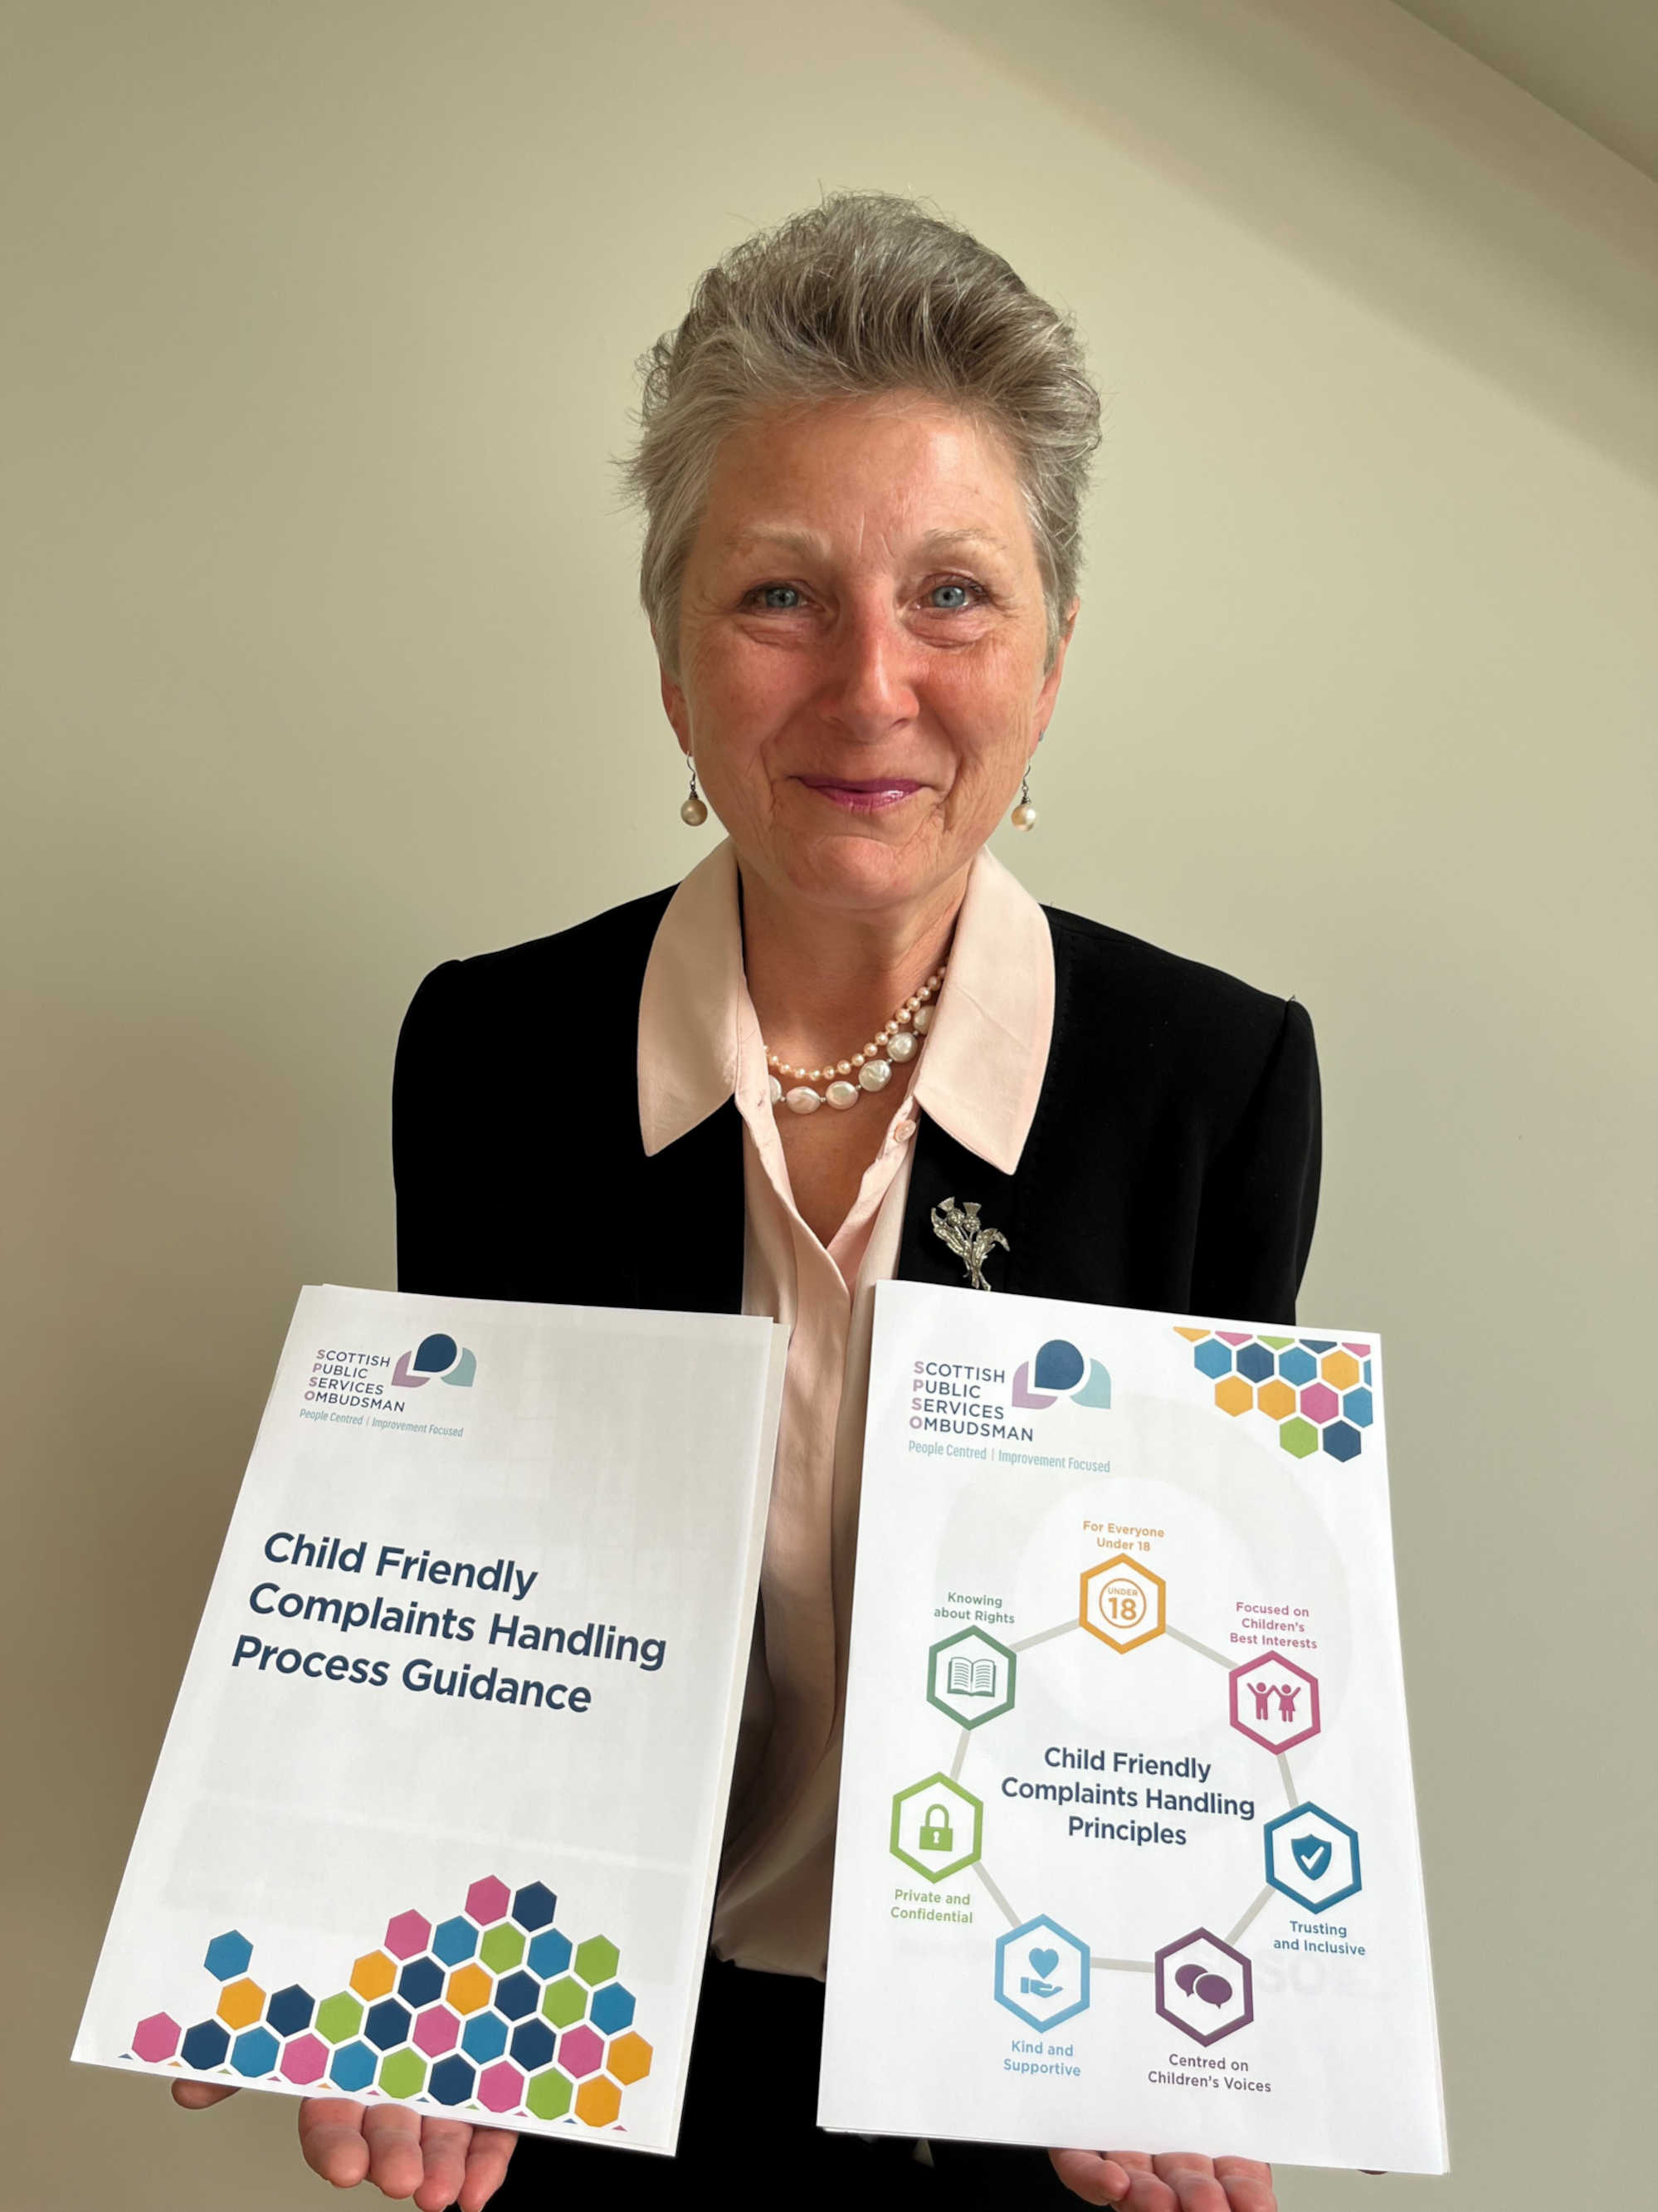 SPSO publishes new child-friendly complaints handling guidance